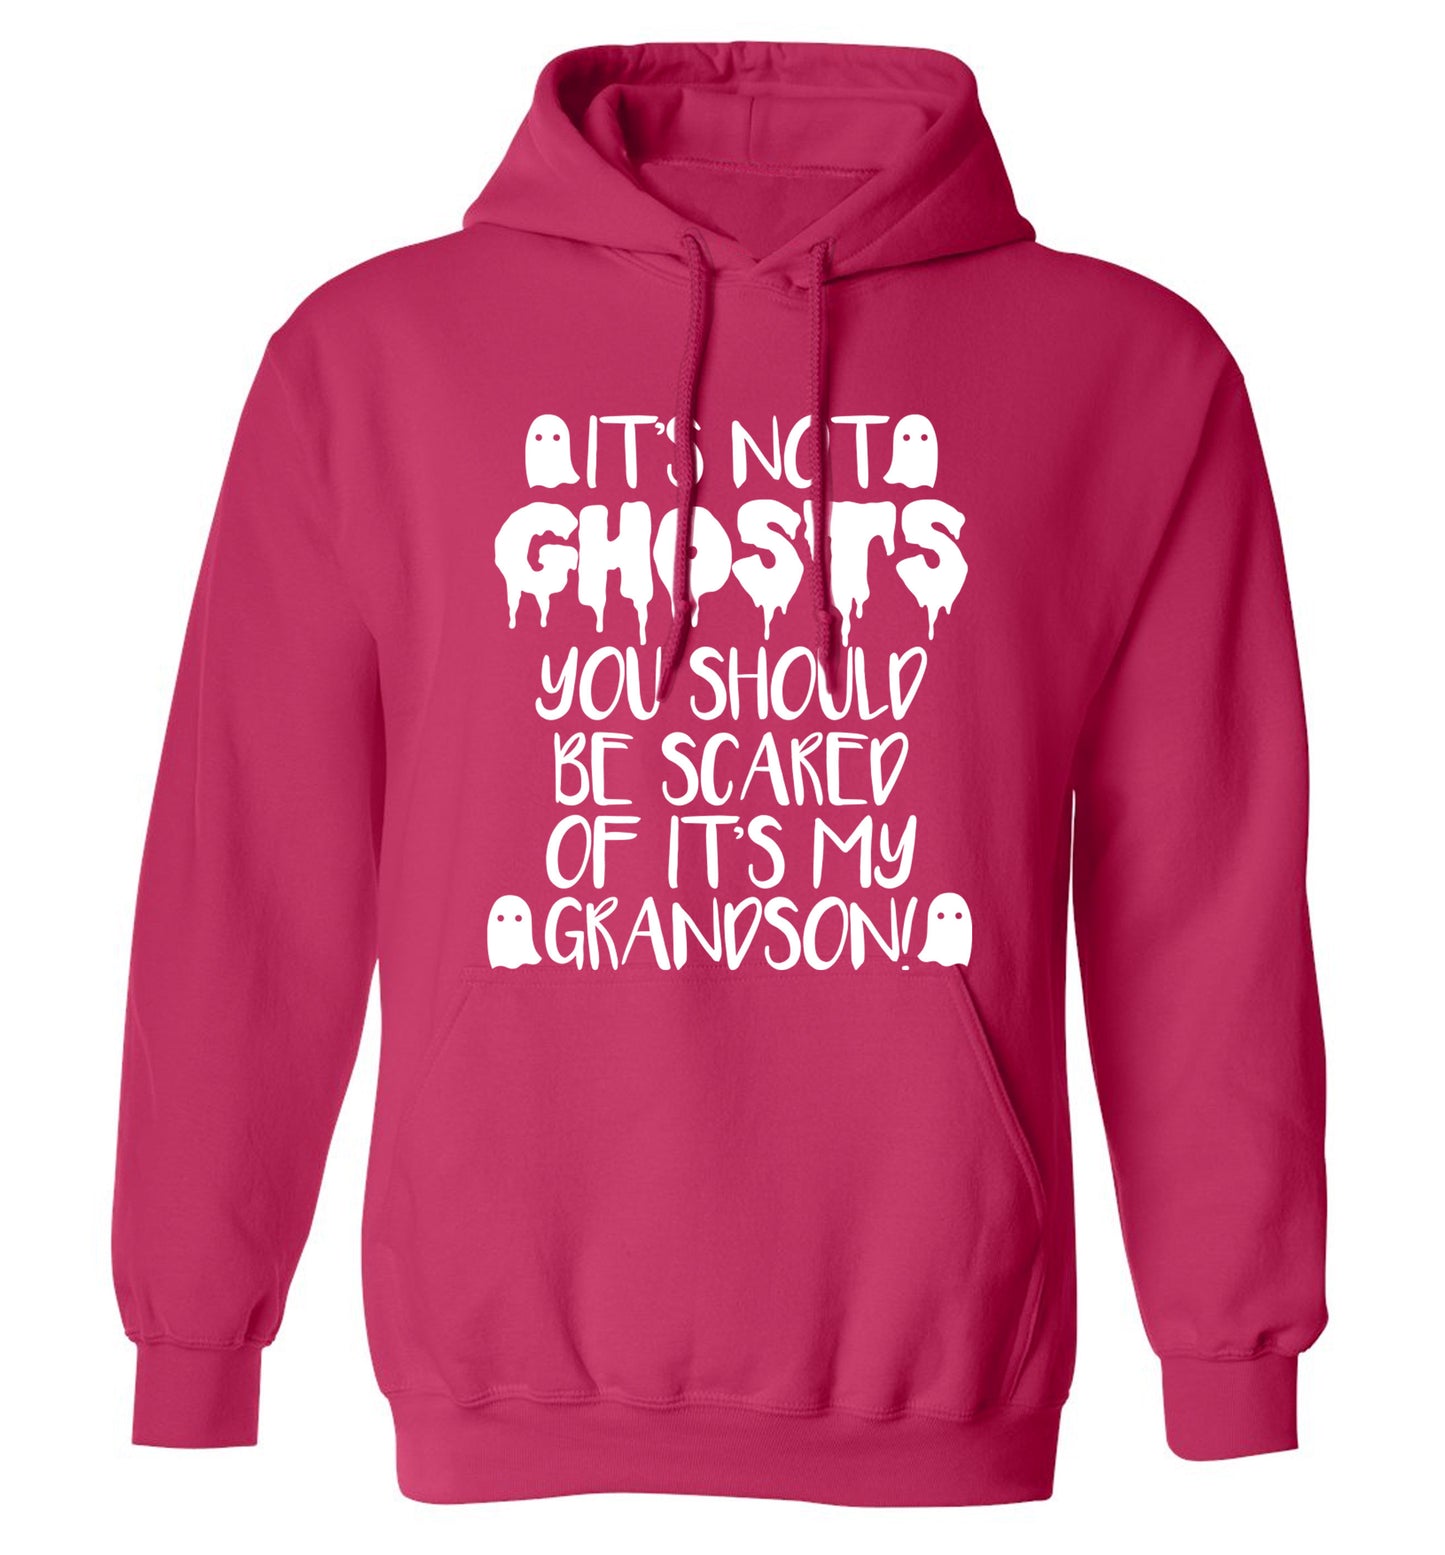 It's not ghosts you should be scared of it's my grandson! adults unisex pink hoodie 2XL